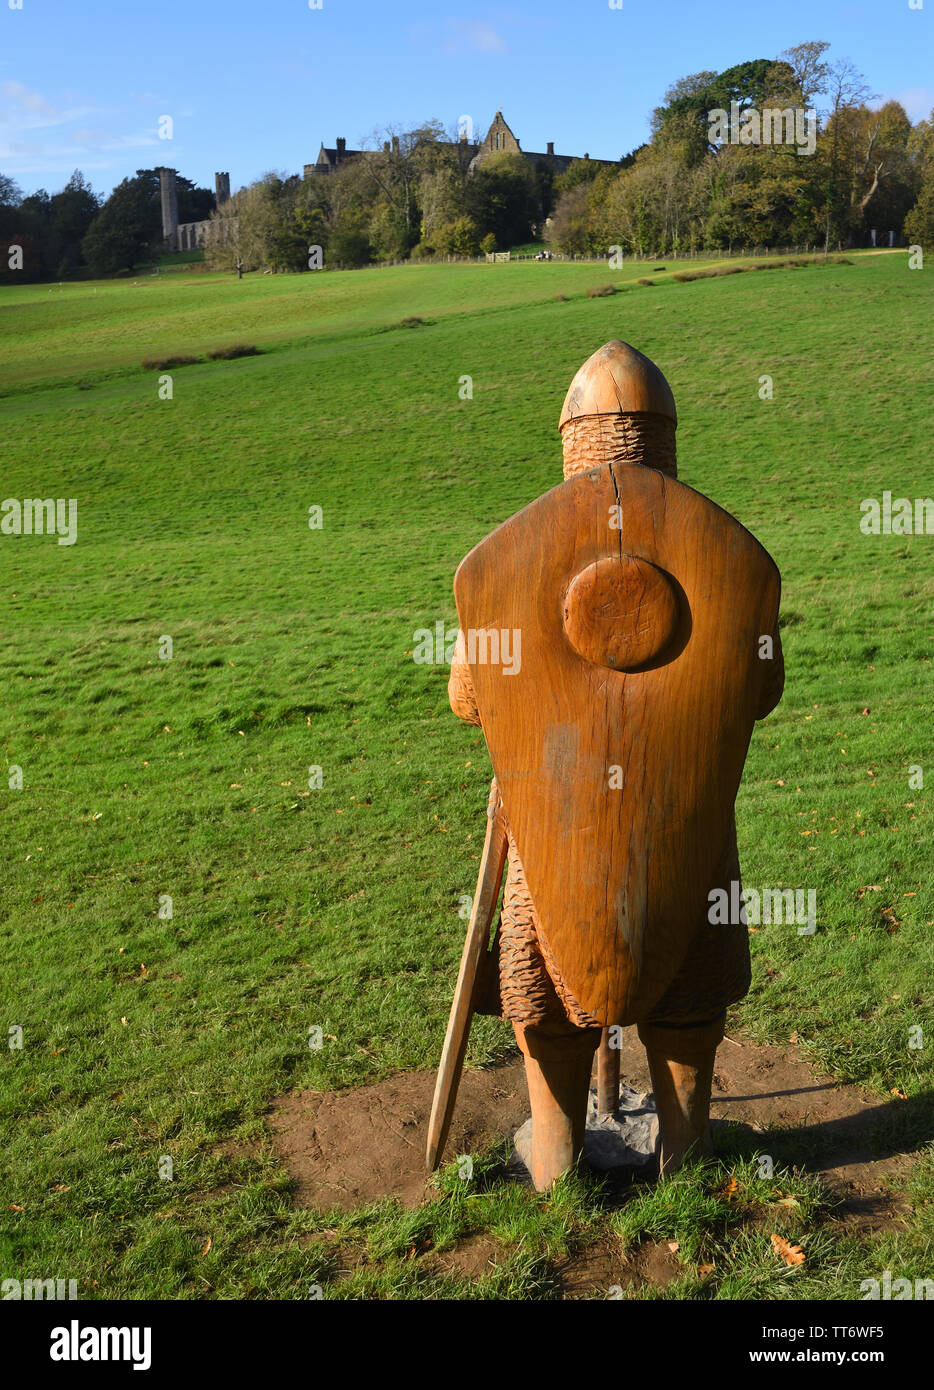 The Battle of Hasting  Battle site  with Battle Abbey in the background and full size carved  wooden soldier in foreground. Stock Photo